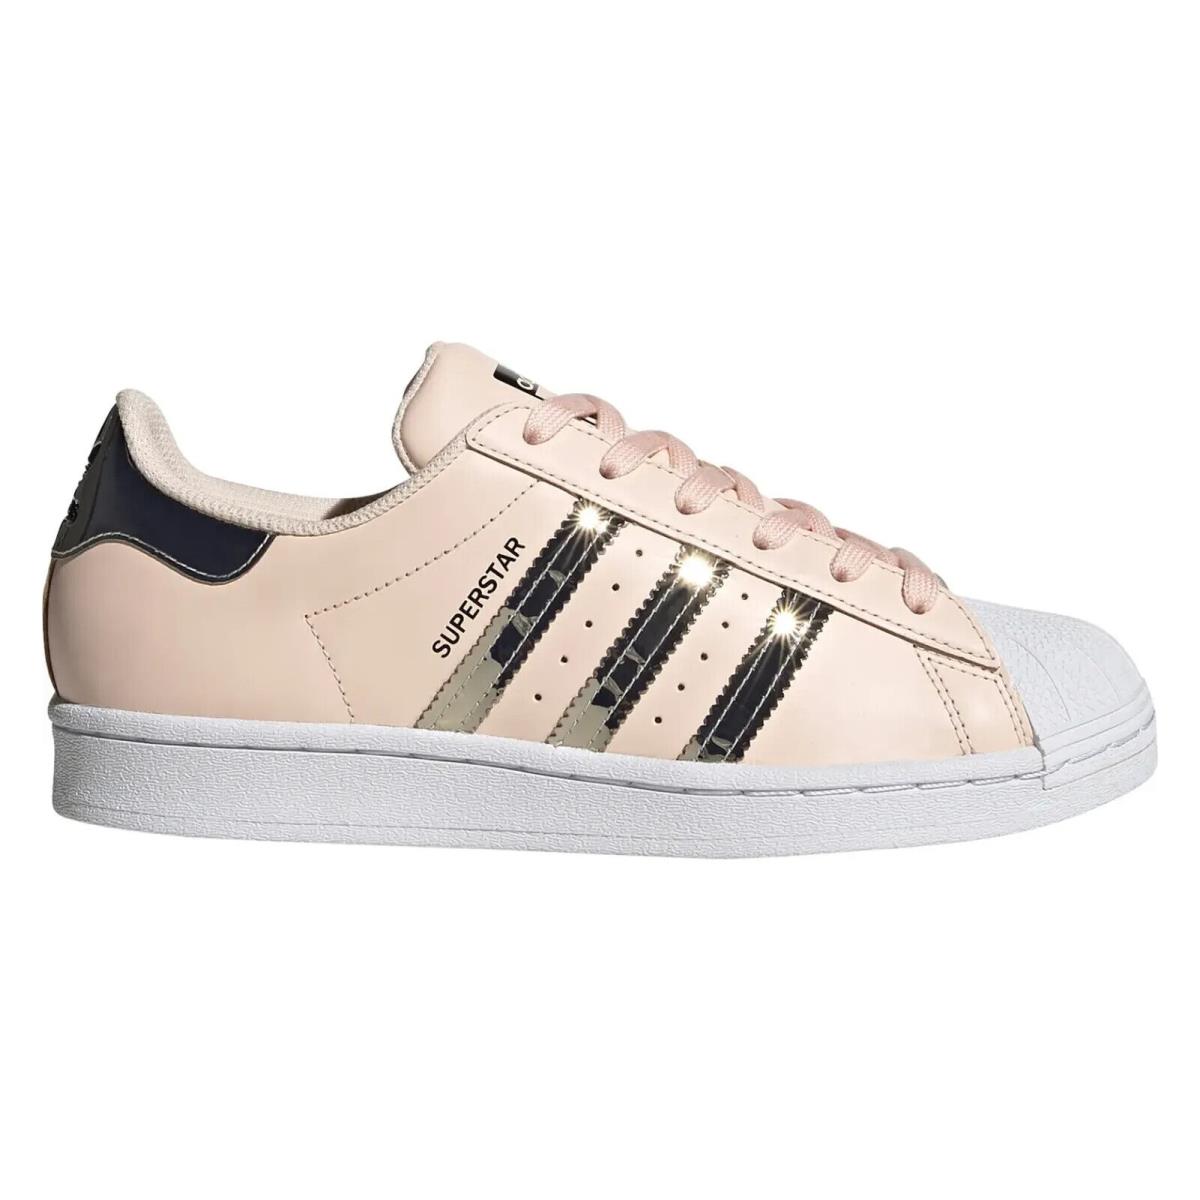 Adidas Originals Superstar Pink Tint Silver White Womens Casual Shoes FW5014-NEW